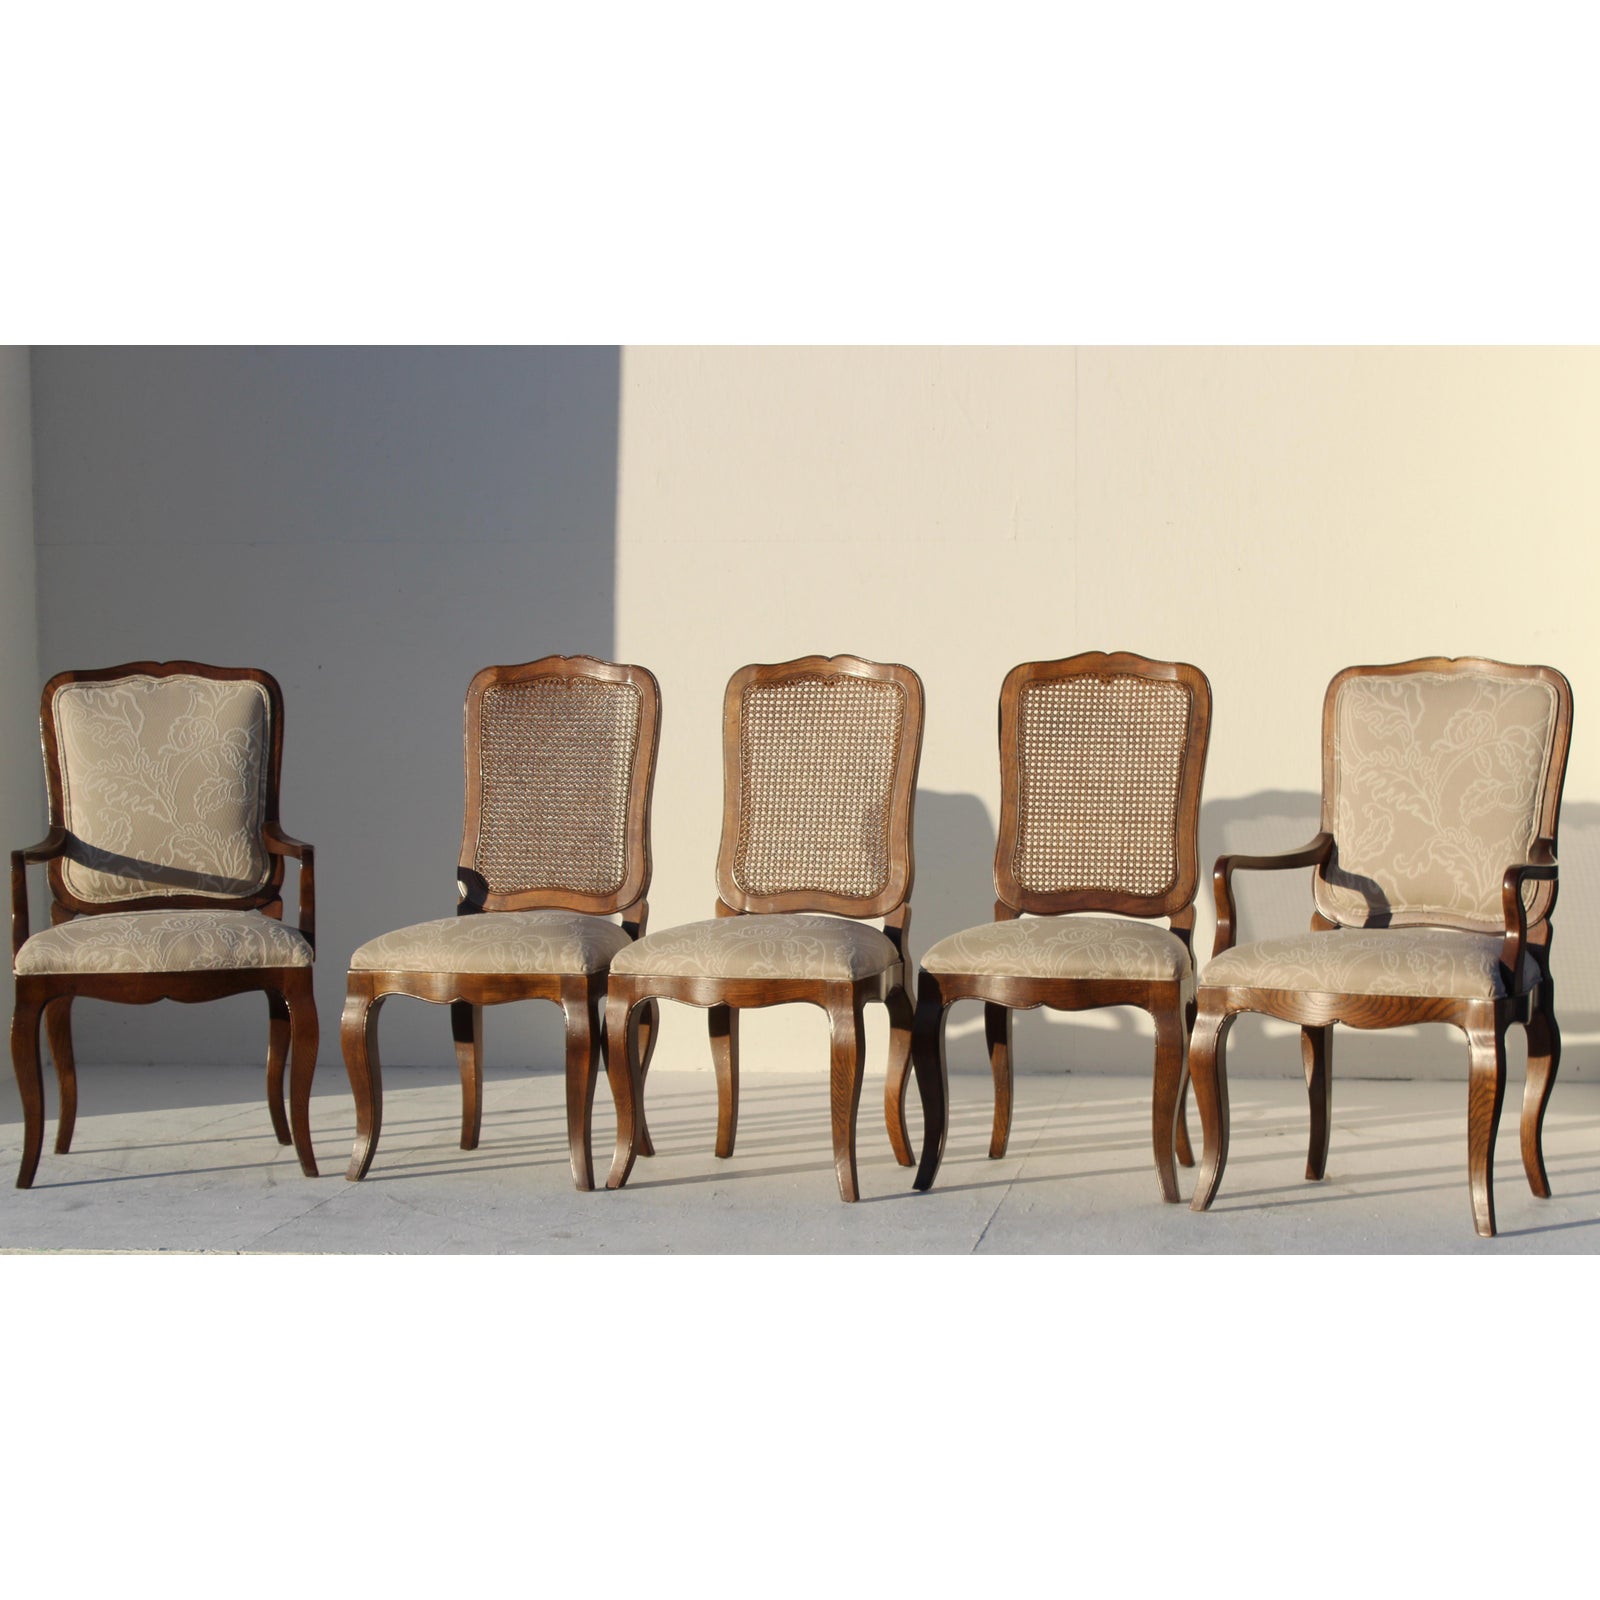 baker-traditional-dining-chairs-set-of-6-2765